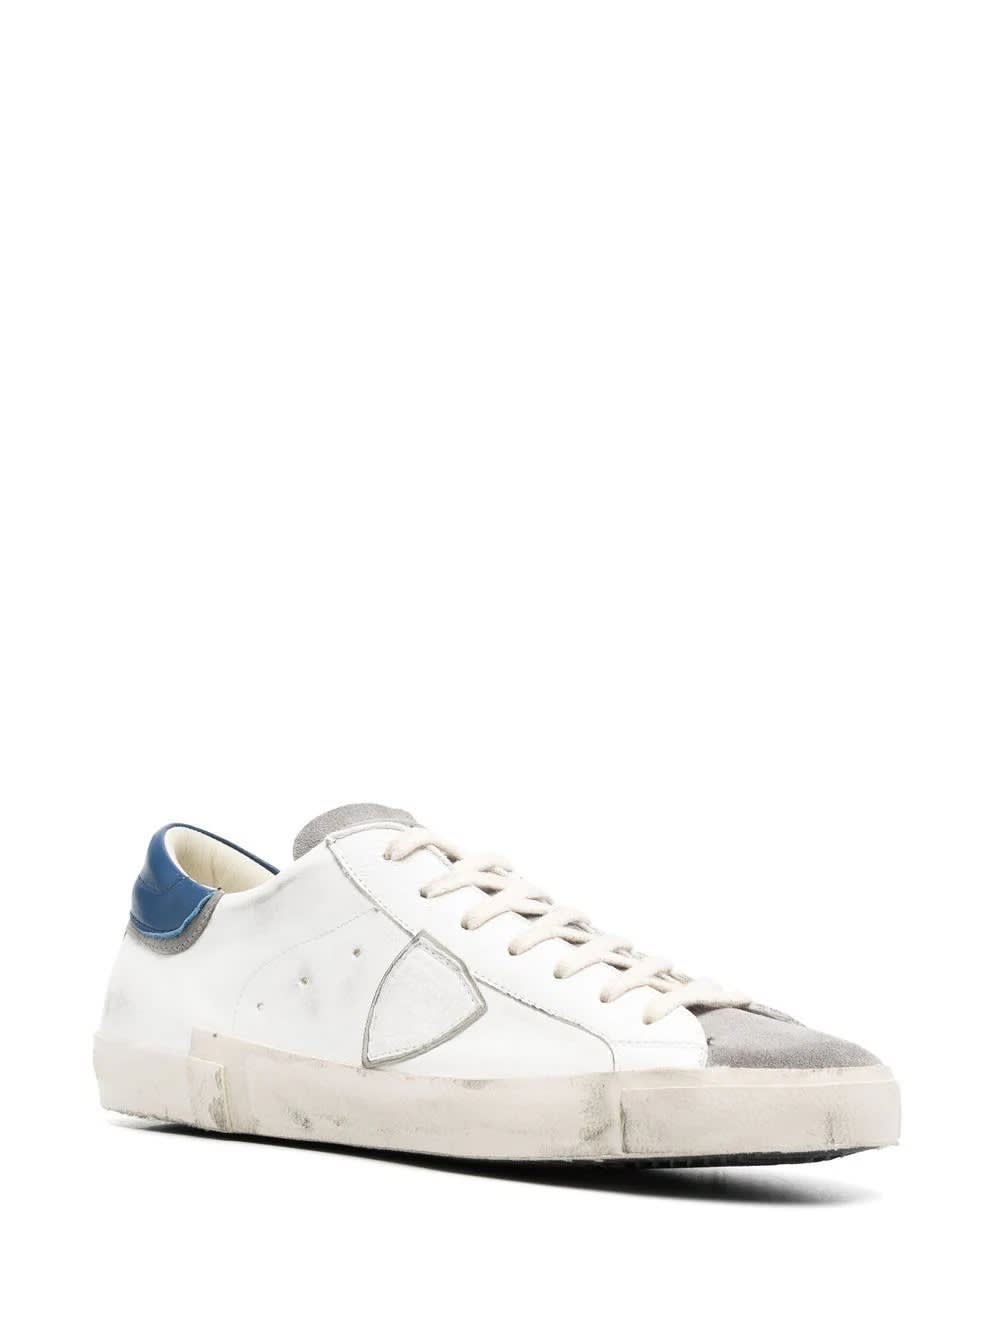 Shop Philippe Model Prsx Low Sneakers - White And Blue